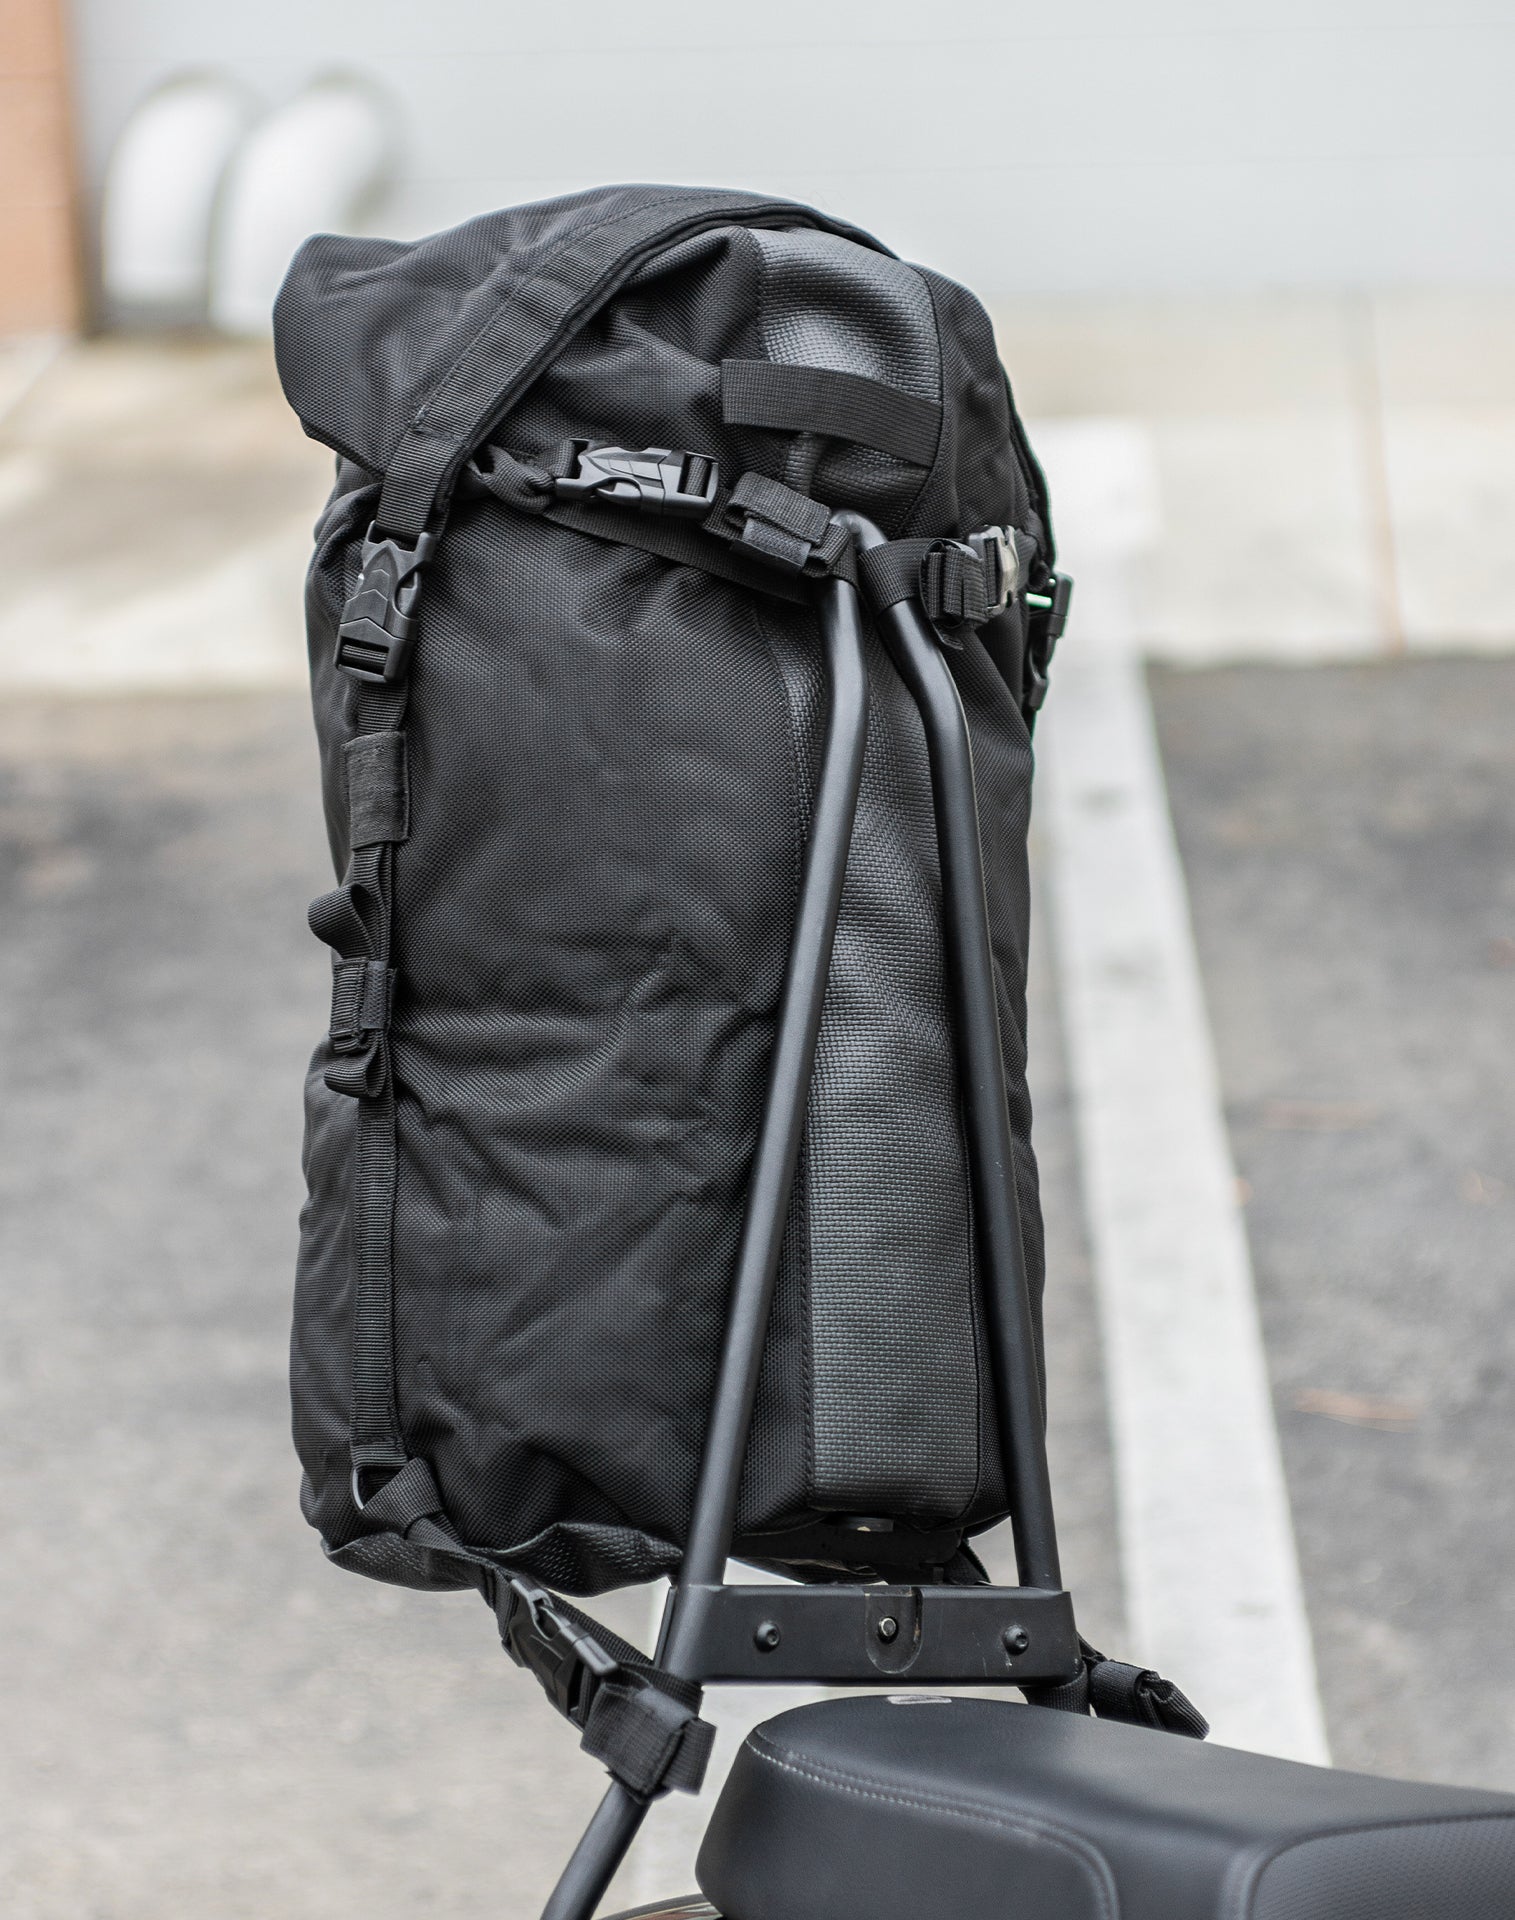 35L - Renegade XL Triumph Motorcycle Dry Backpack